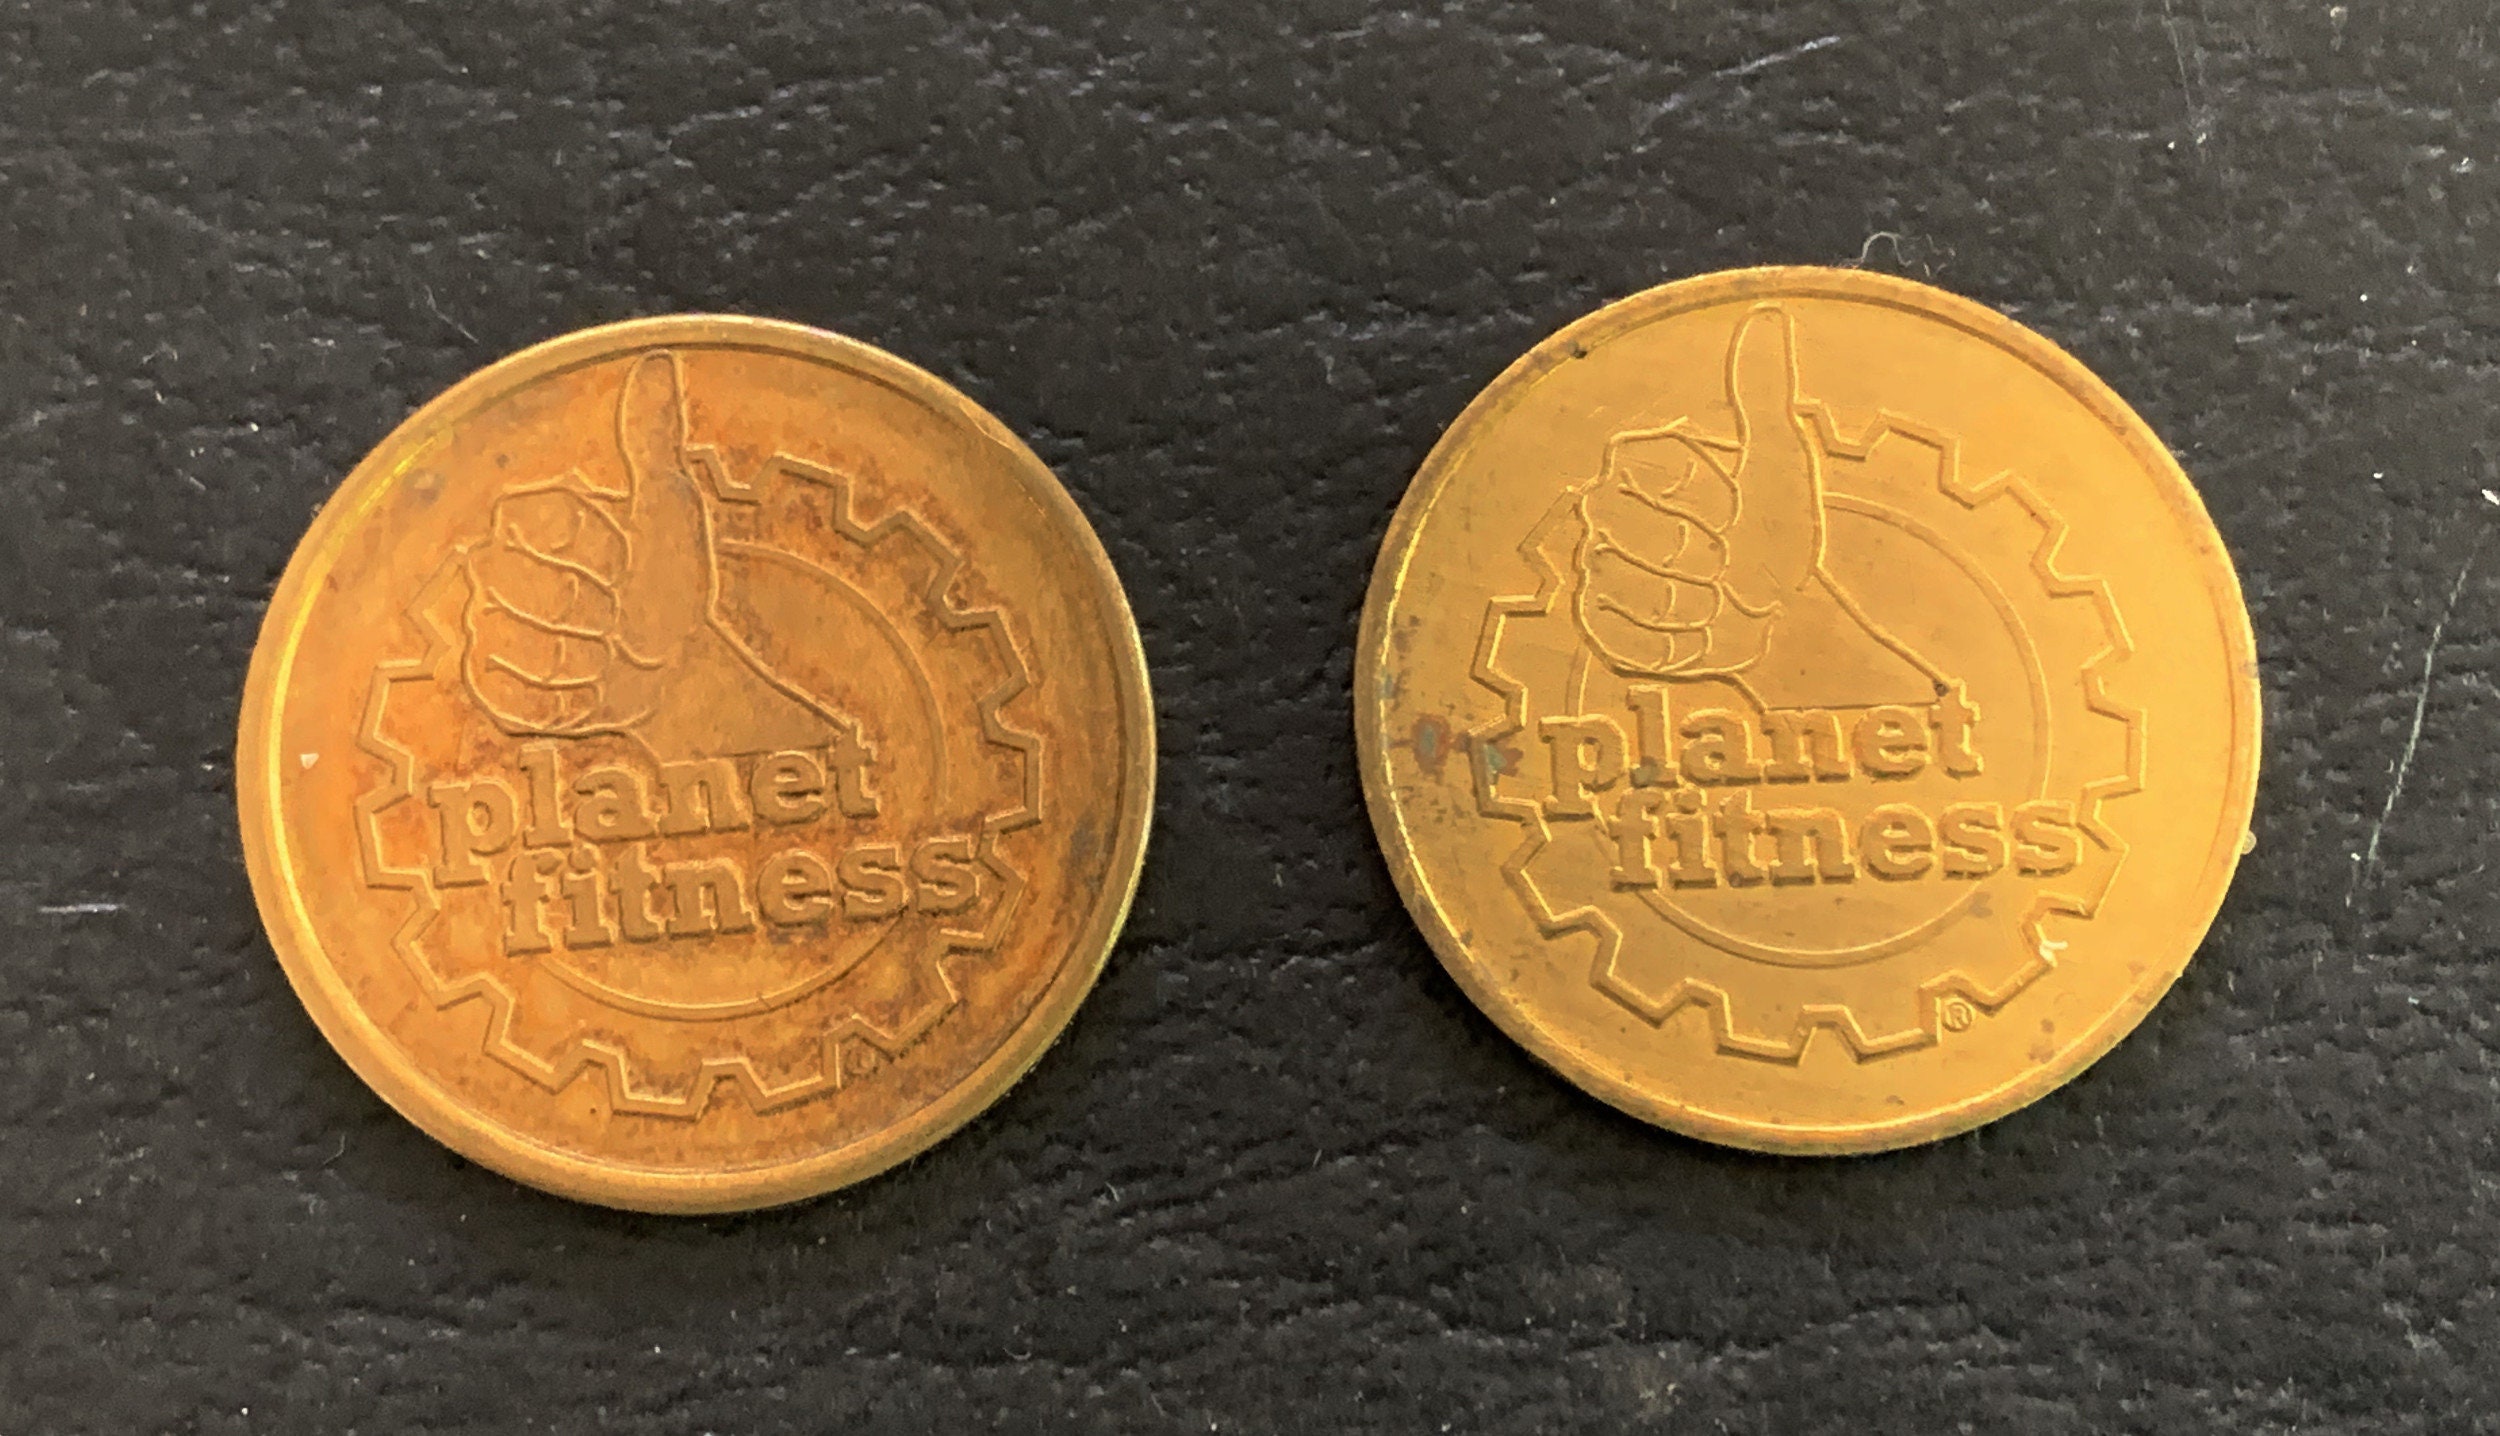 Free: Planet Fitness Token/Coin One Massage Visit - Coins -   Auctions for Free Stuff